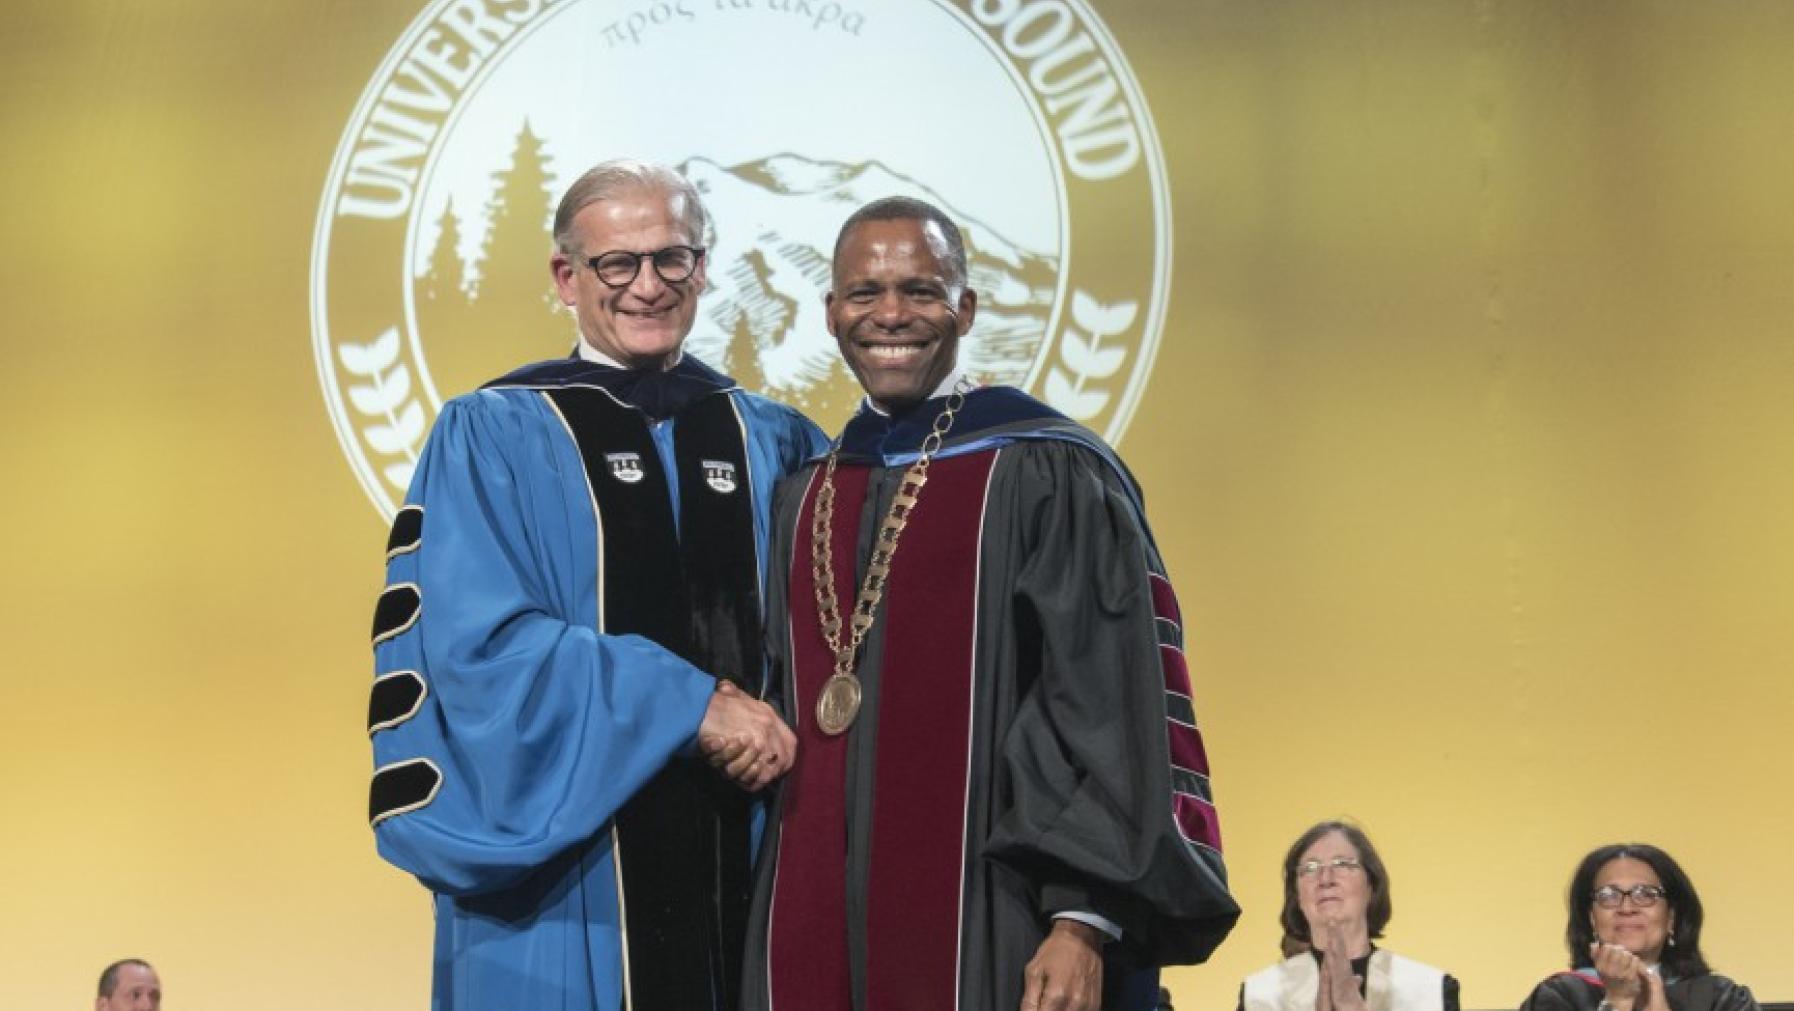 President Emeritus Ron Thomas presenting President Isiaah Crawford with the university medallion during the Installation Ceremony. Photo by Ross Mulhausen.